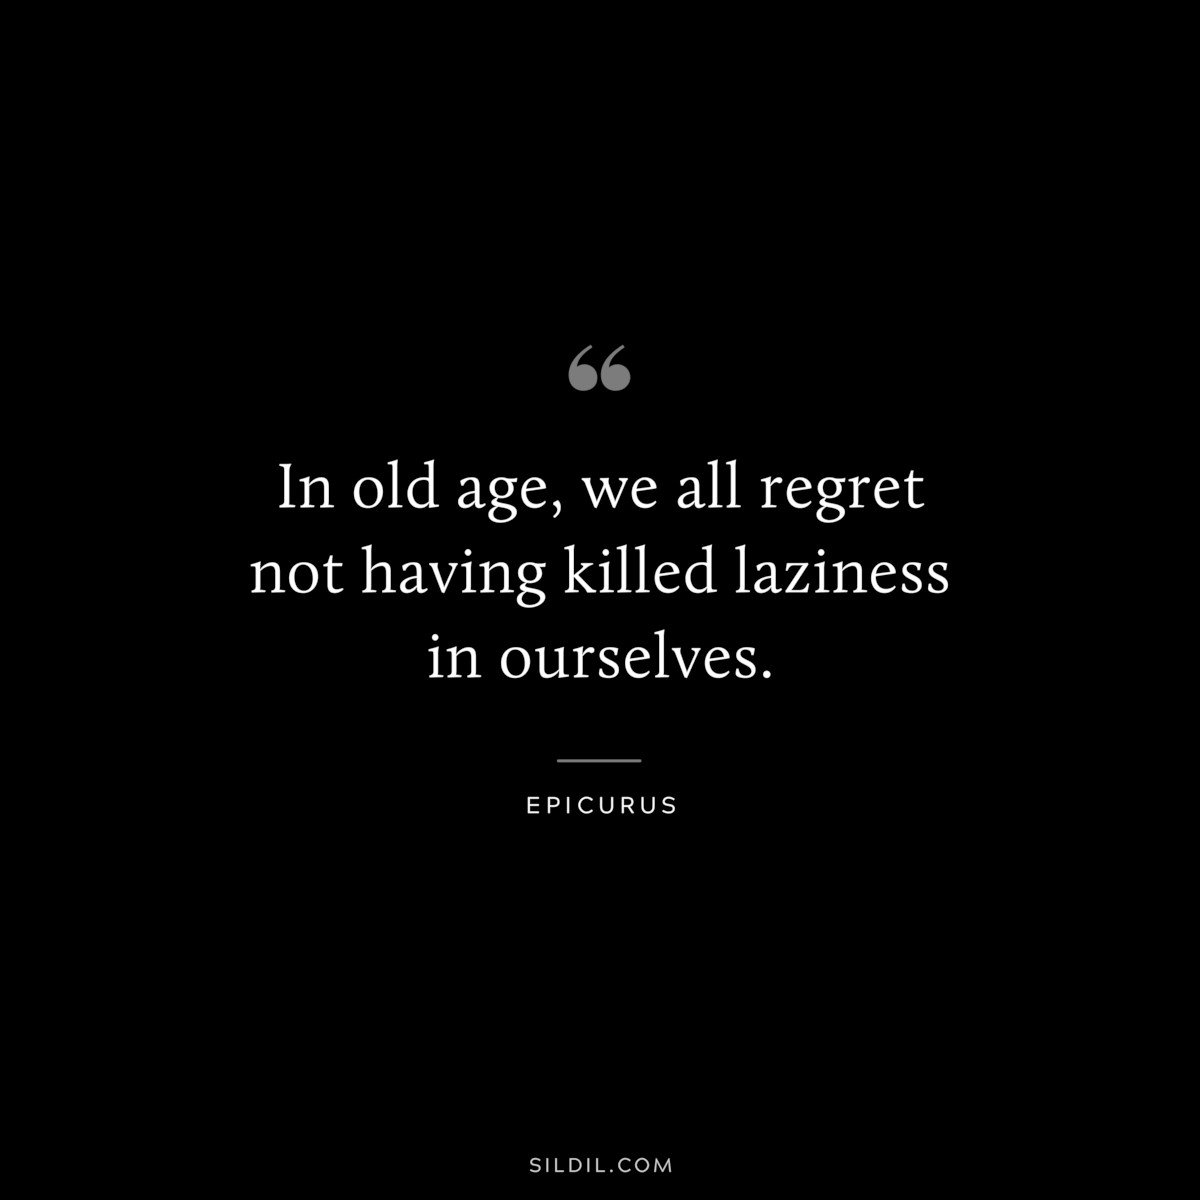 In old age, we all regret not having killed laziness in ourselves. — Epicurus